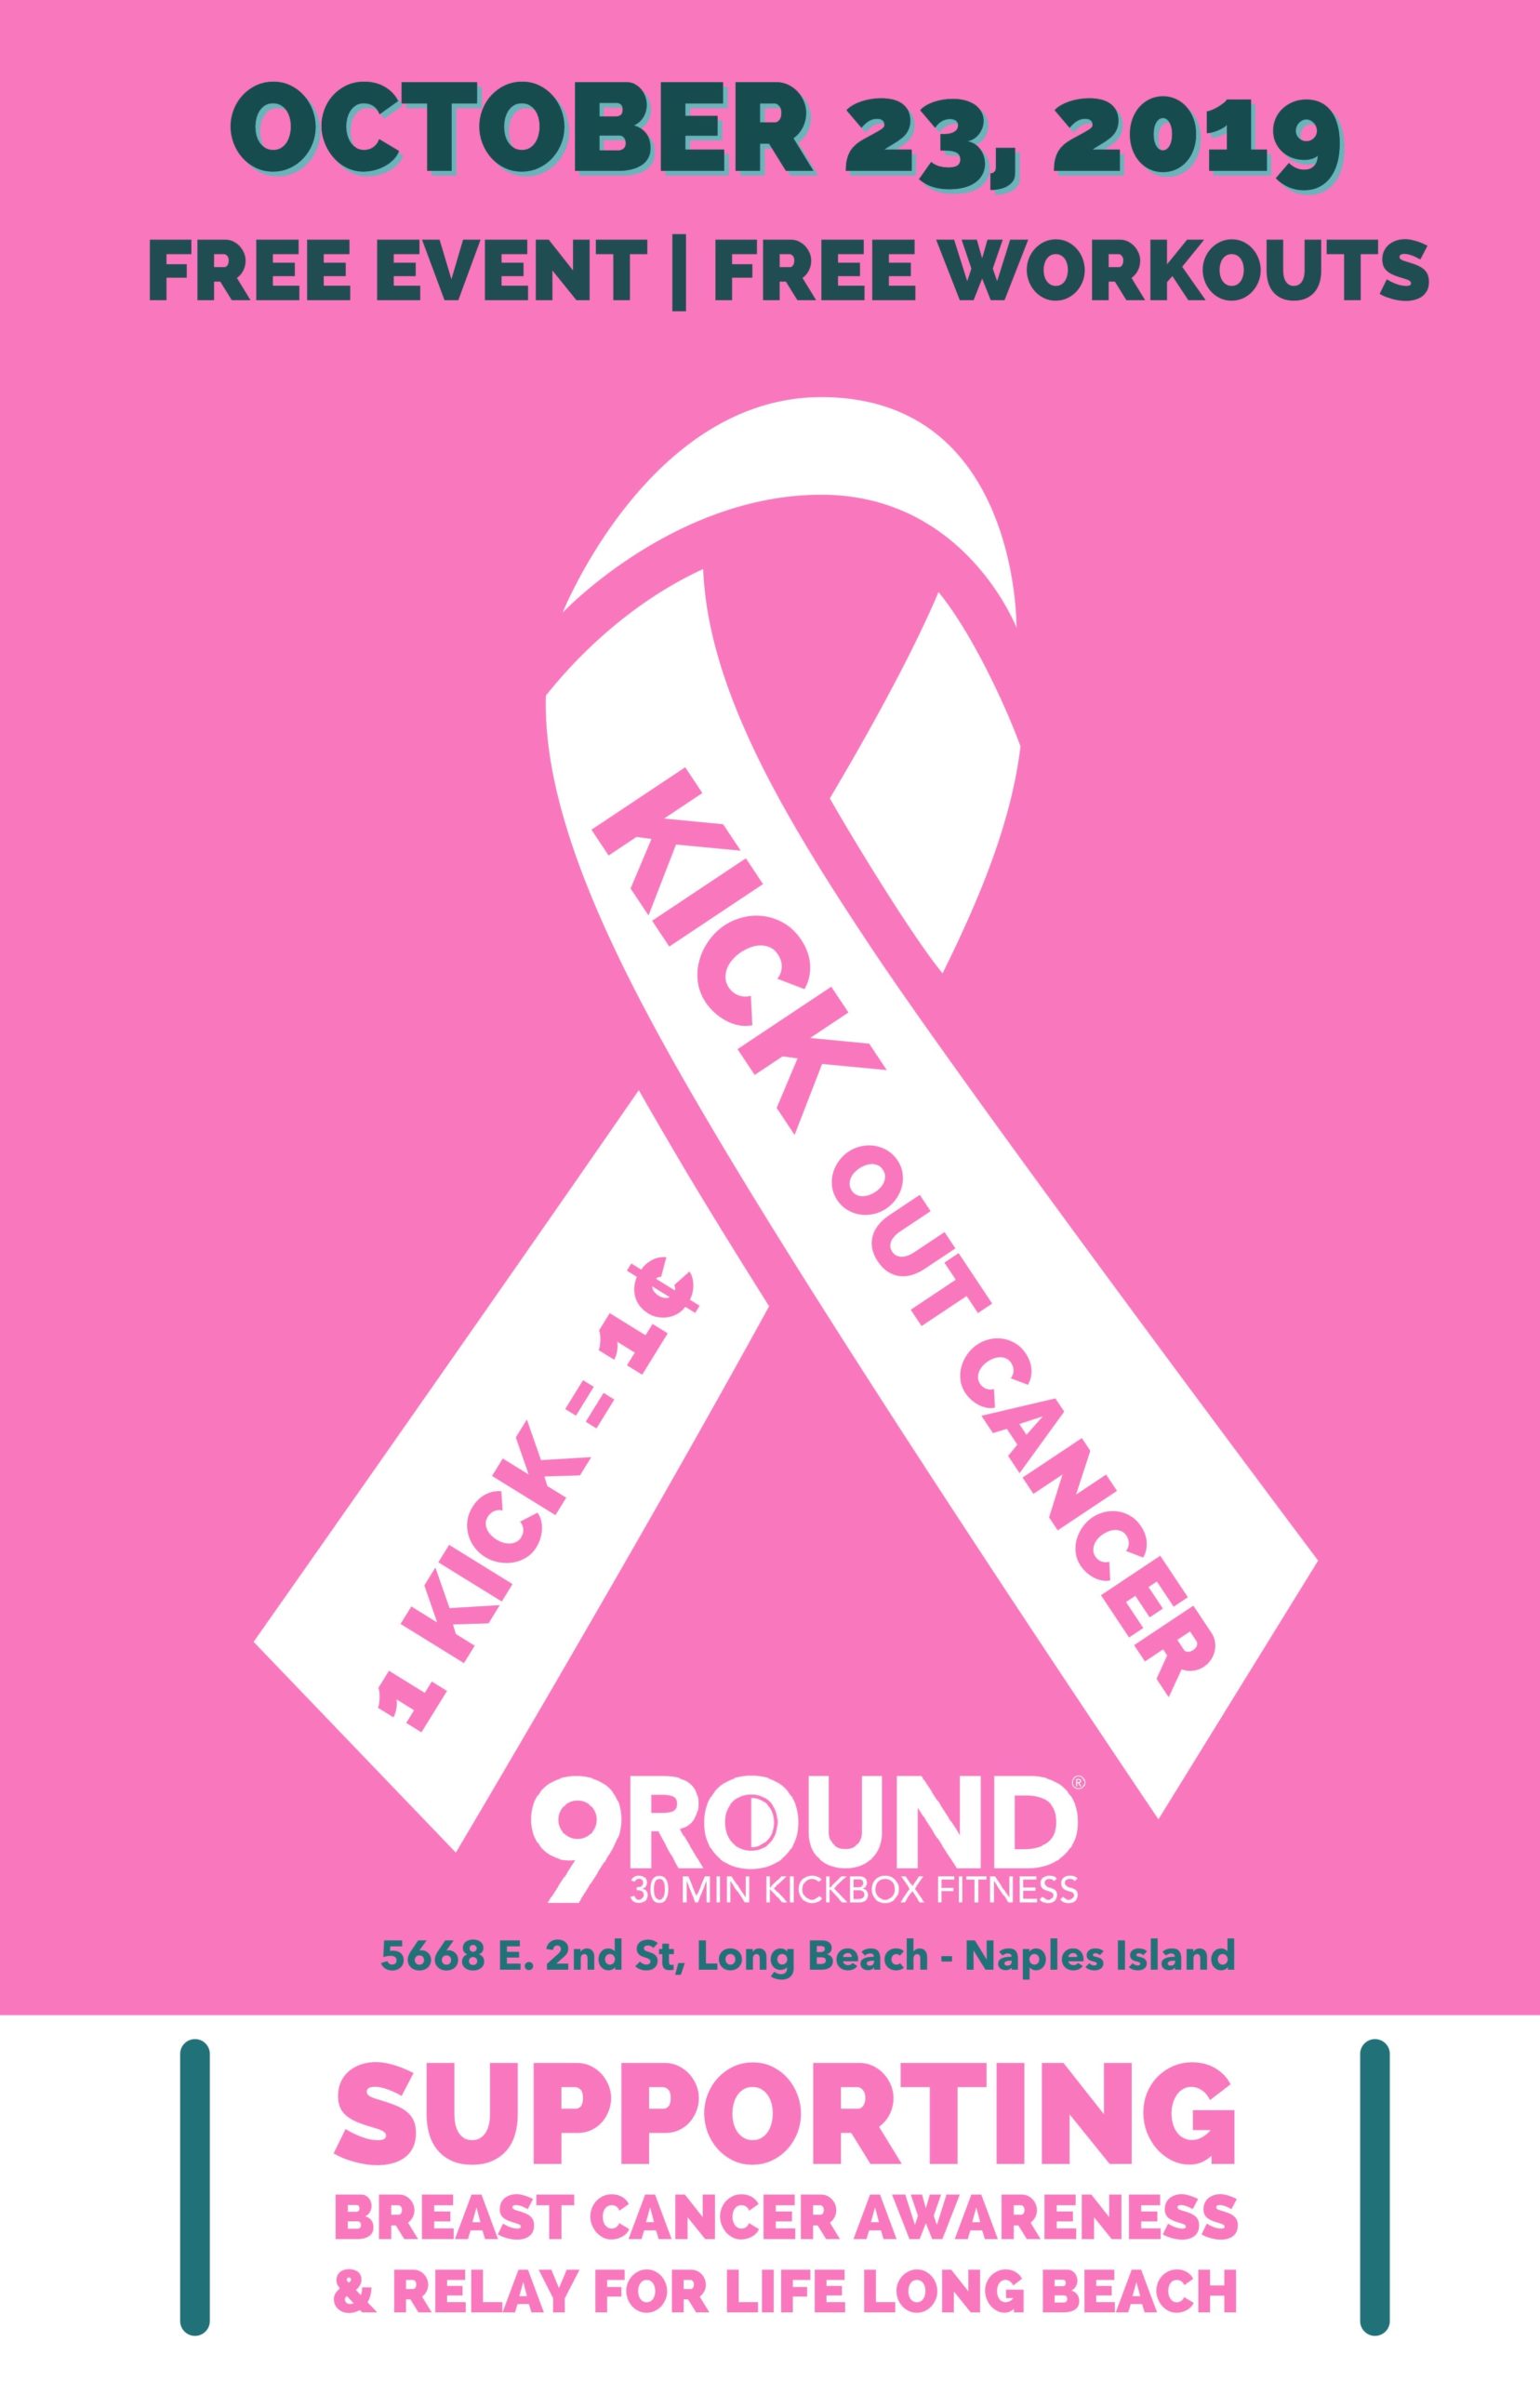 9Round Long Beach to Host Kick Event for RELAY FOR LIFE LONG BEACH